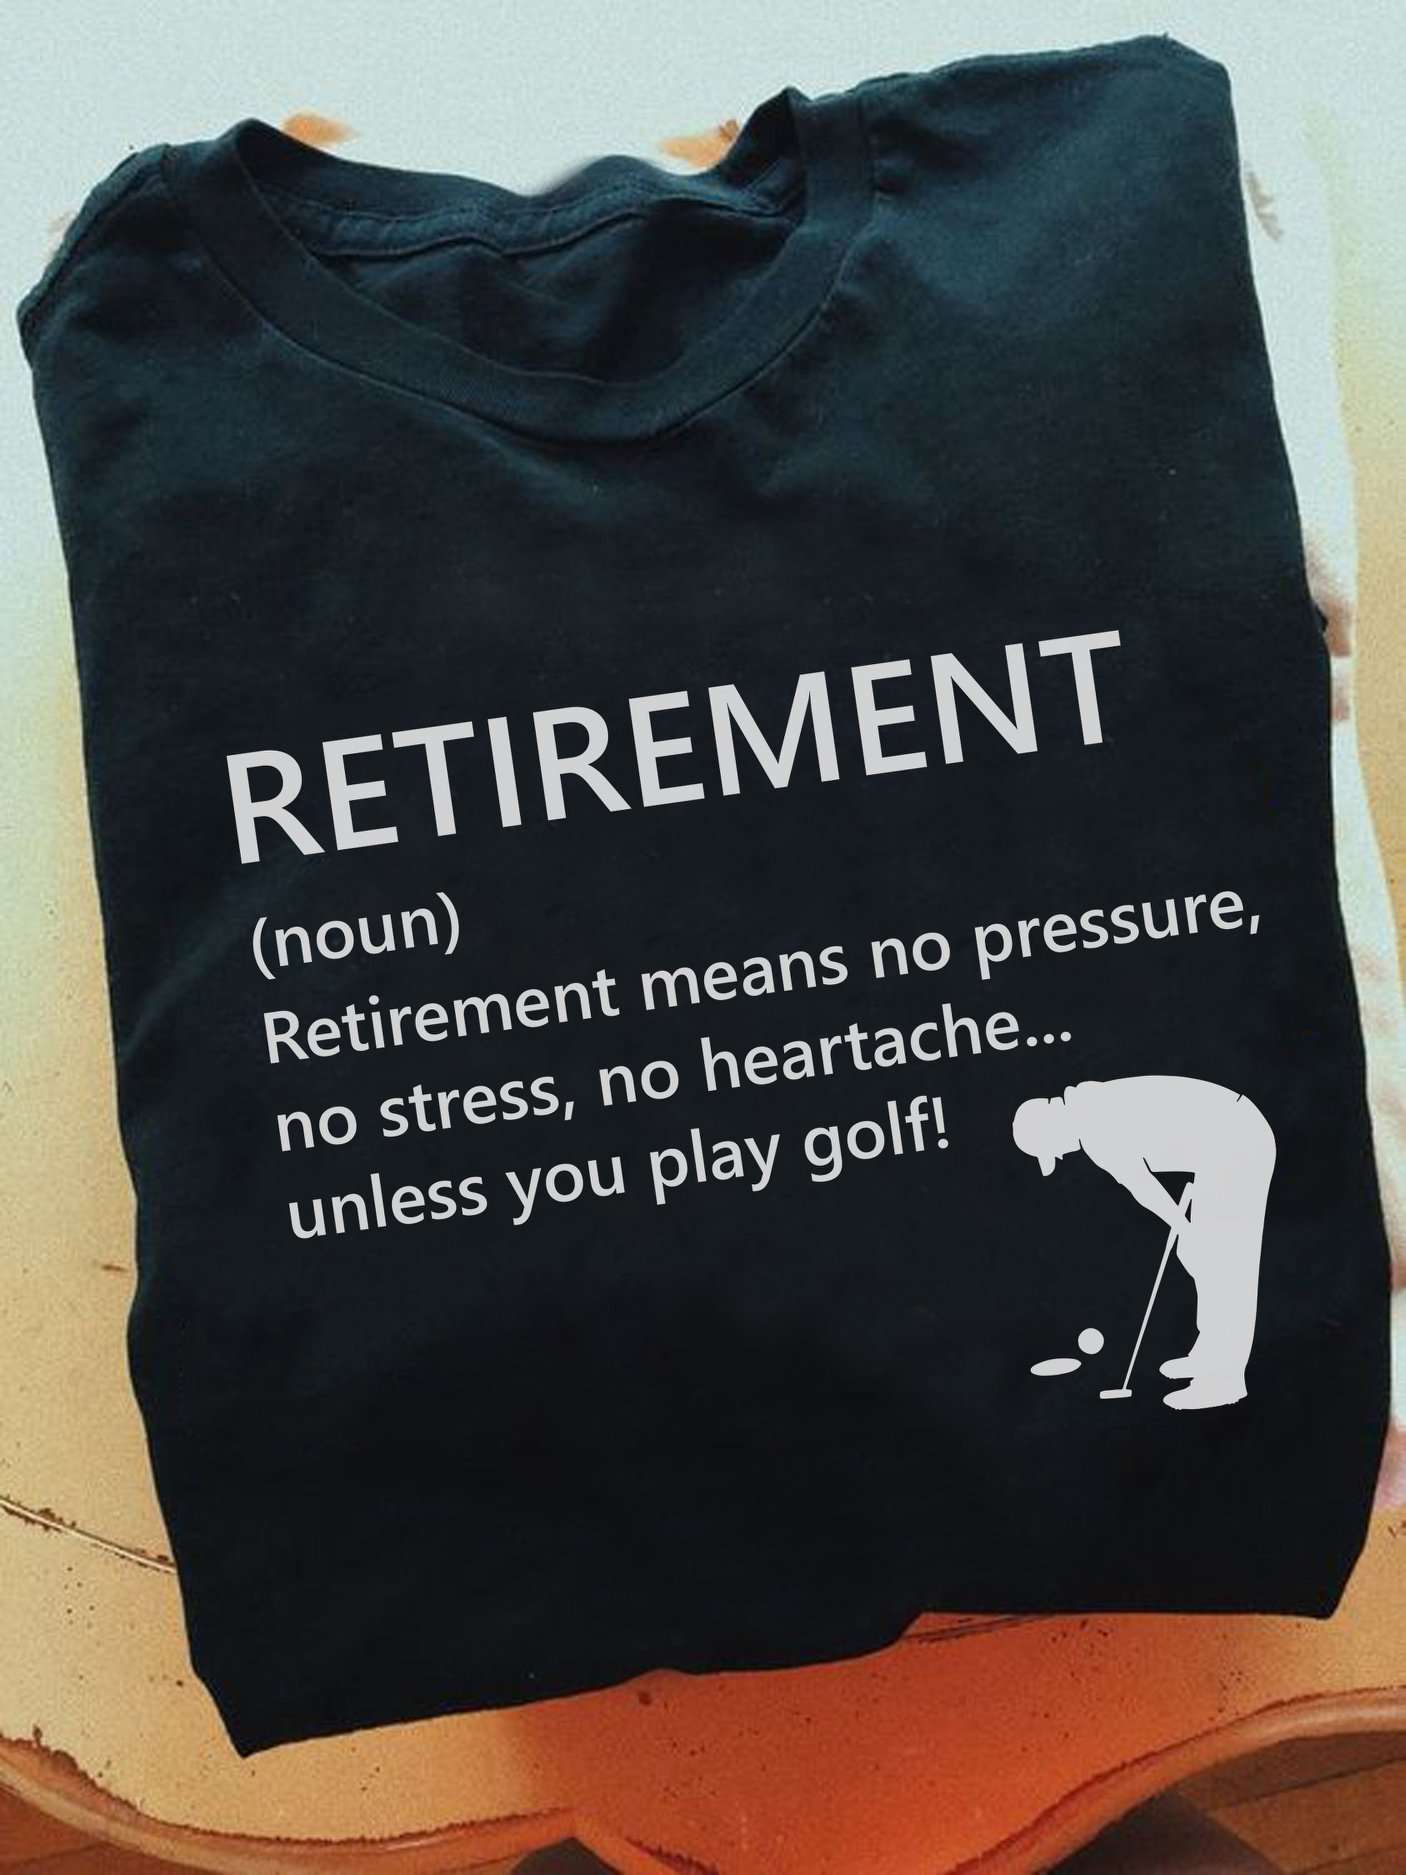 Retirement means no pressure, no stress, no heartache - Retirement plan on golf, love playing golf